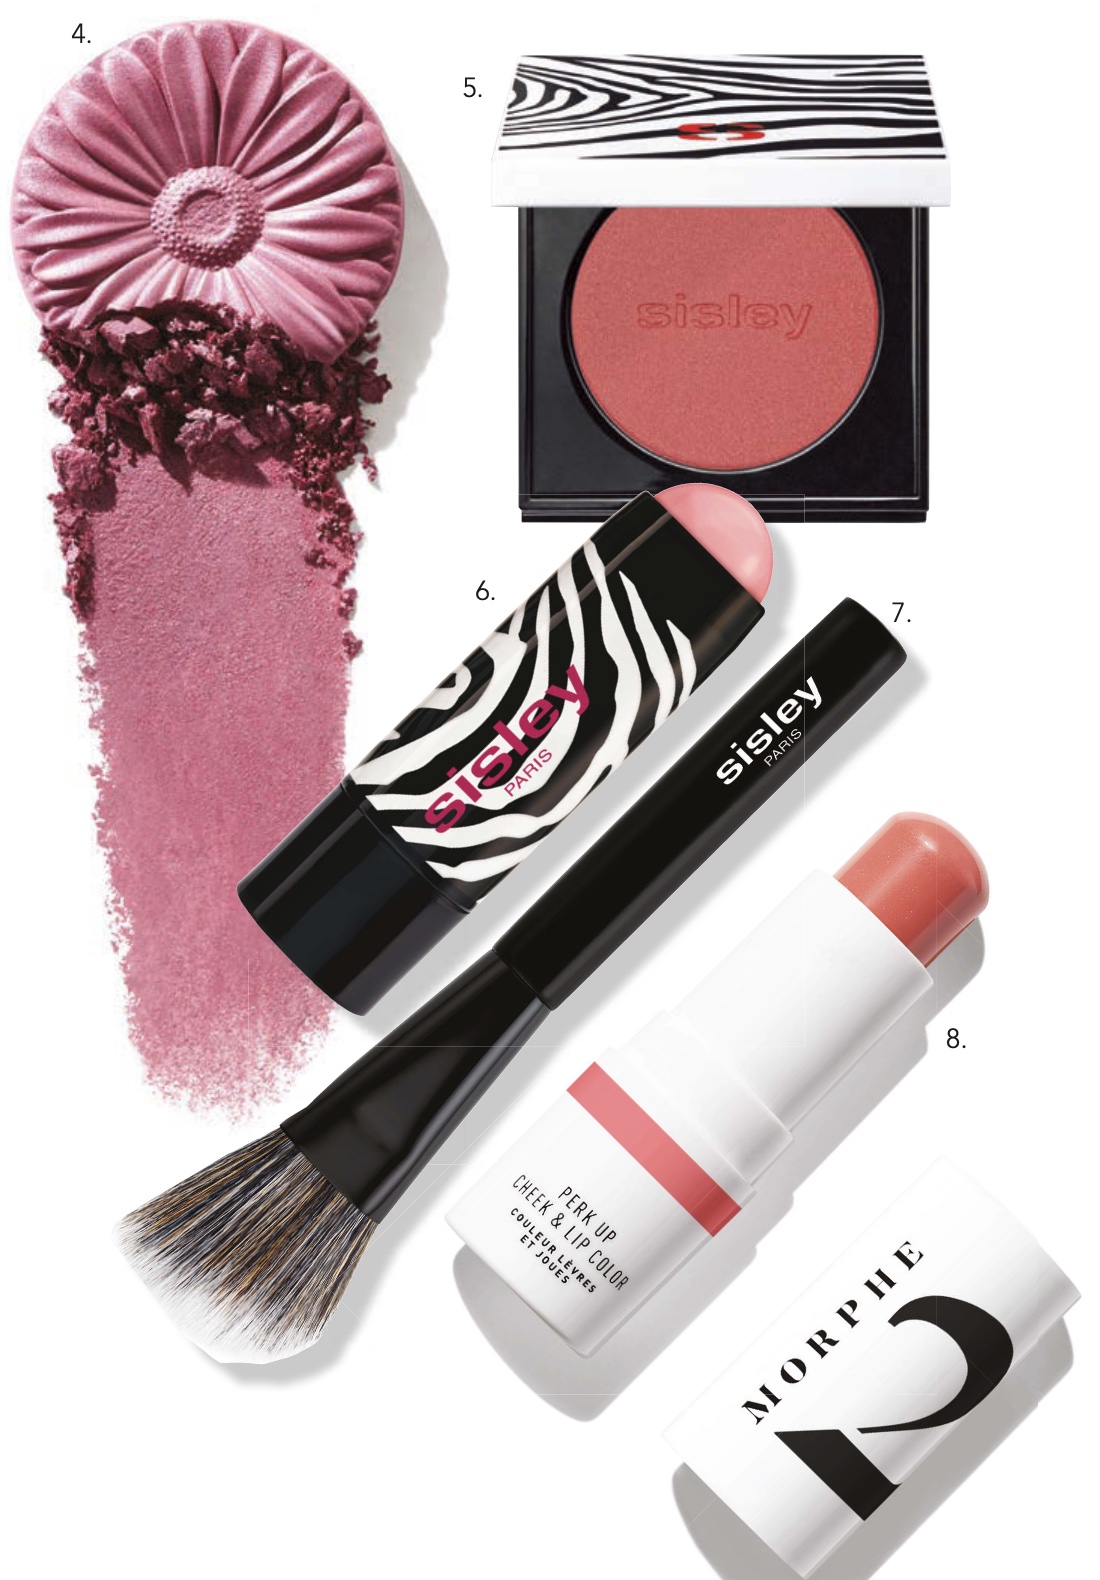 4. Clinique Cheek Pop Pearl in Garnet Pop, $42, 5. Sisley Phyto-Blush in Rosewood, $95, 6. Sisley Phyto-Blush Twist in Rose, $85, 7. Sisley Blush Brush, $80, 8. Morphe 2 PerkUp Cheek & Lip Colour in Rosy Wishes, $18